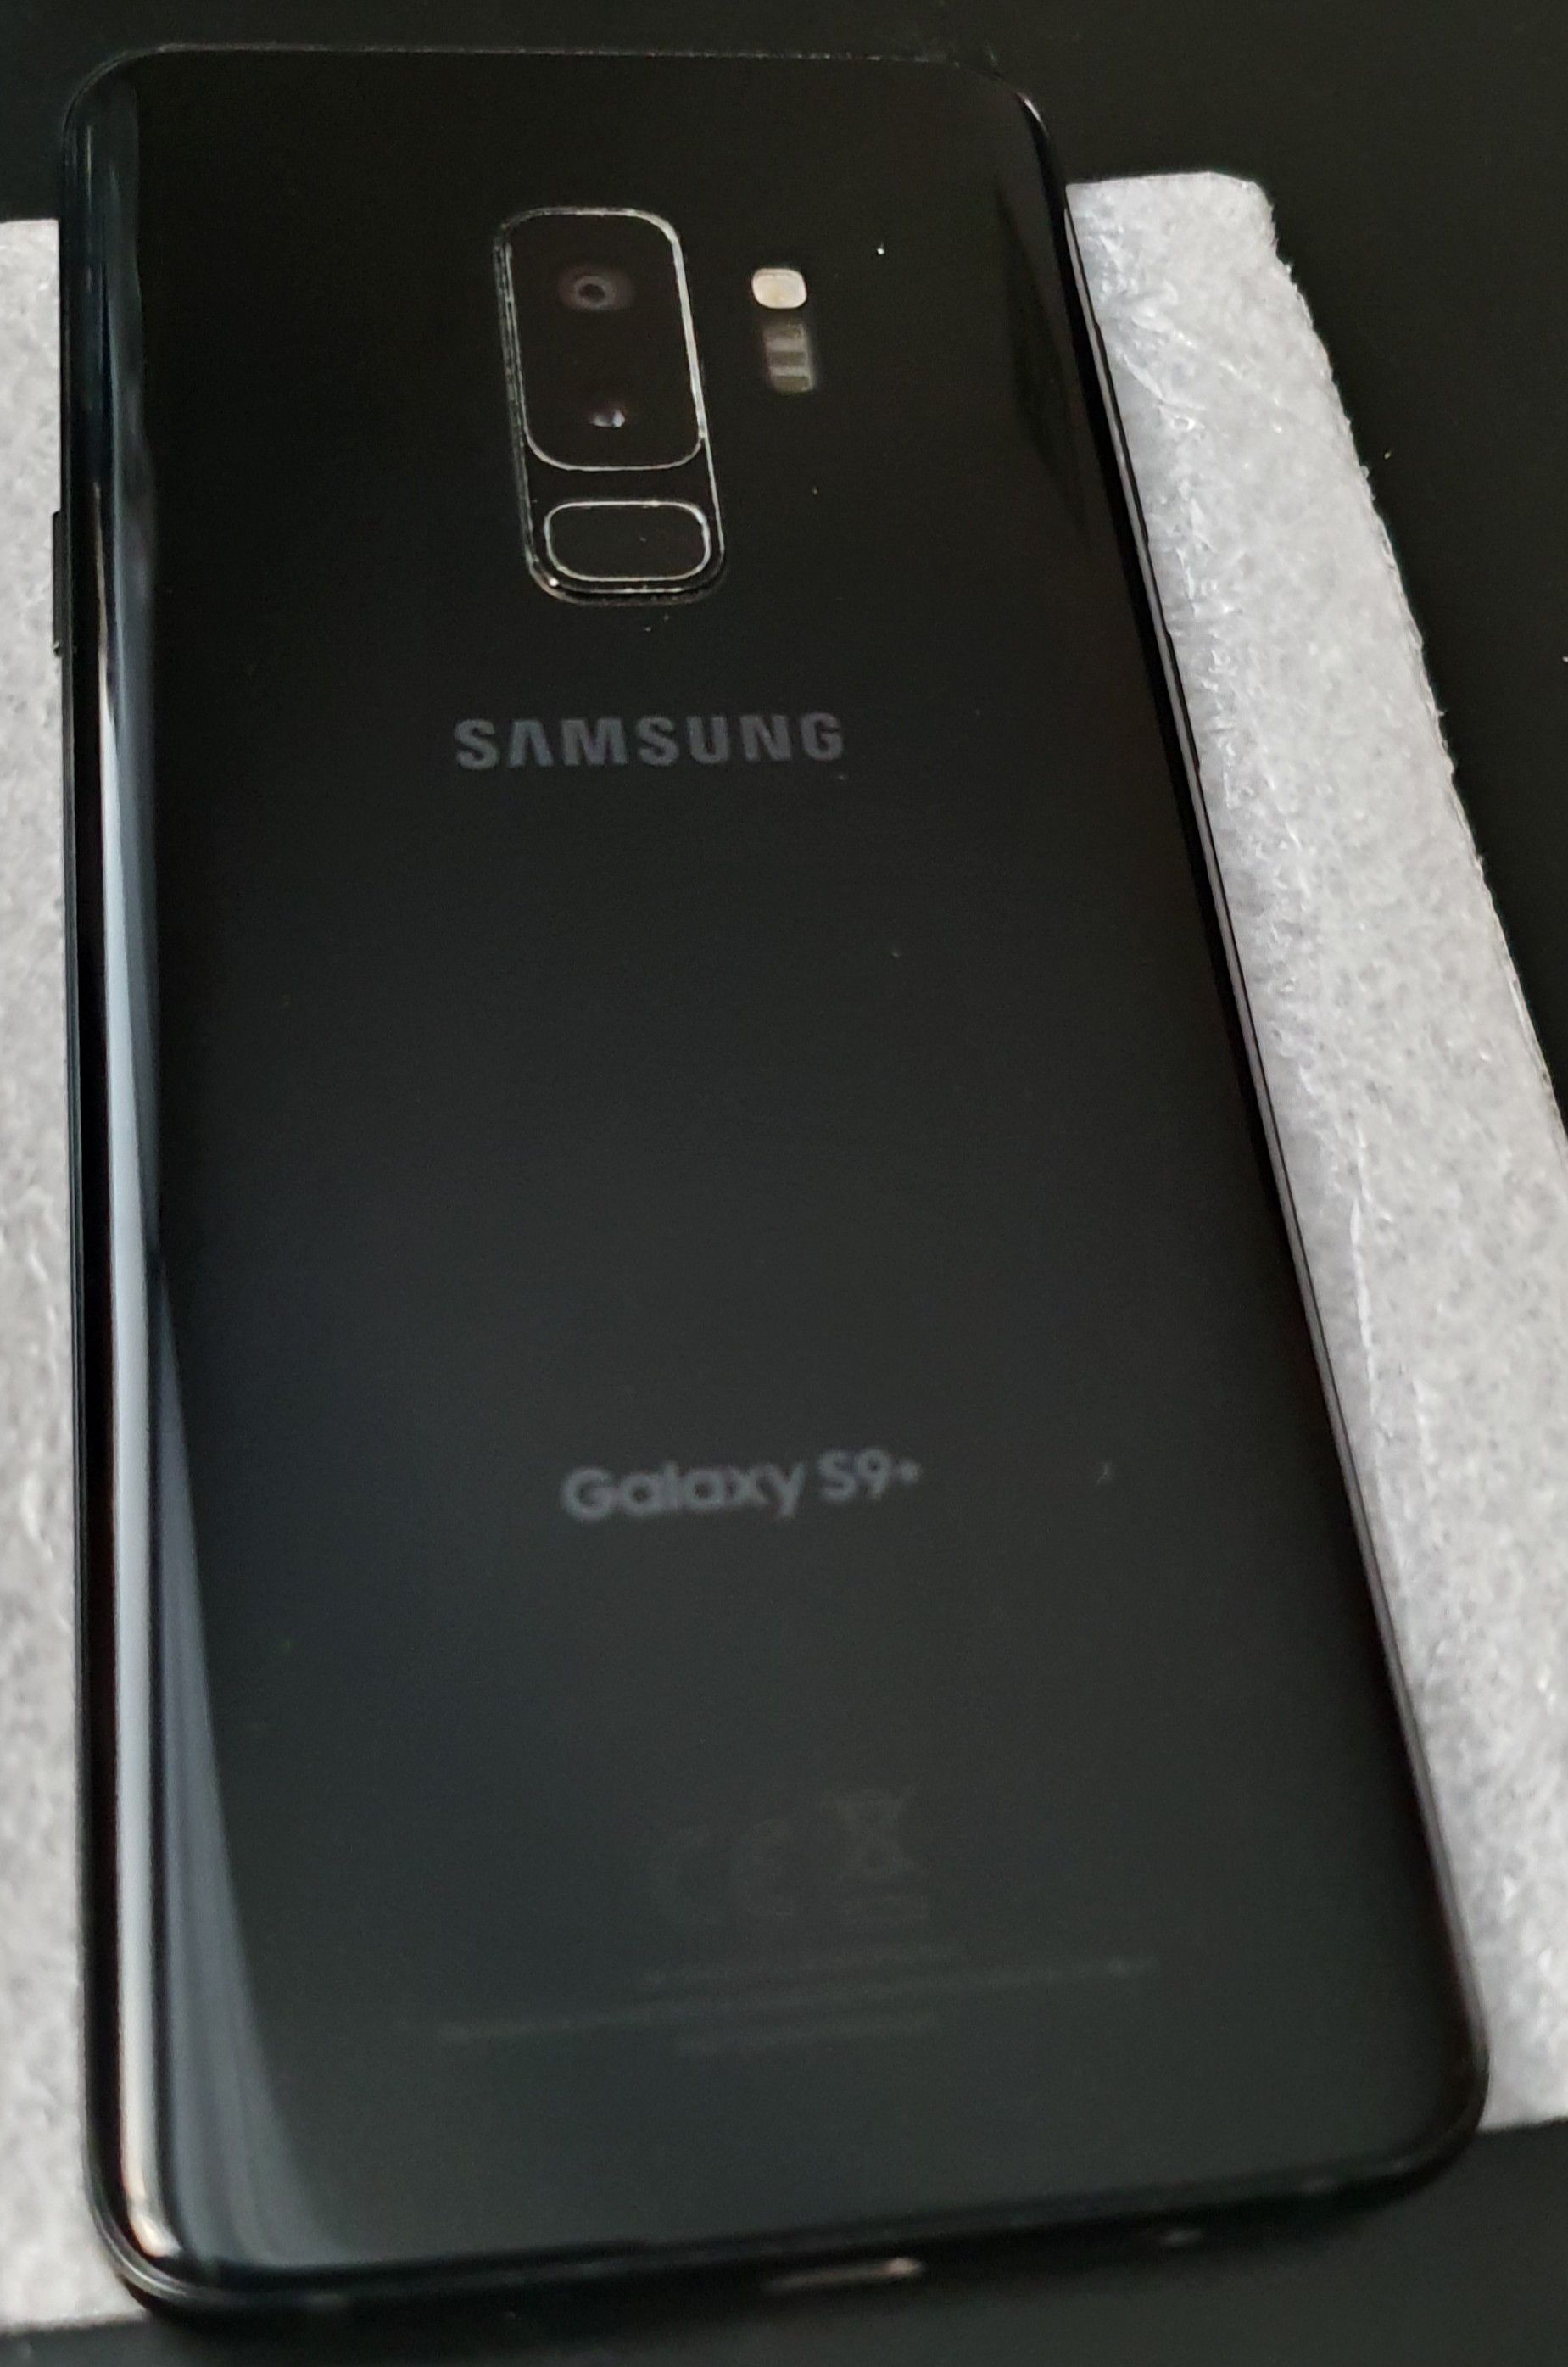 Samsung Galaxy s9 plus. Unlocked for all carriers. Price it is firm. I will ignore lower offers.